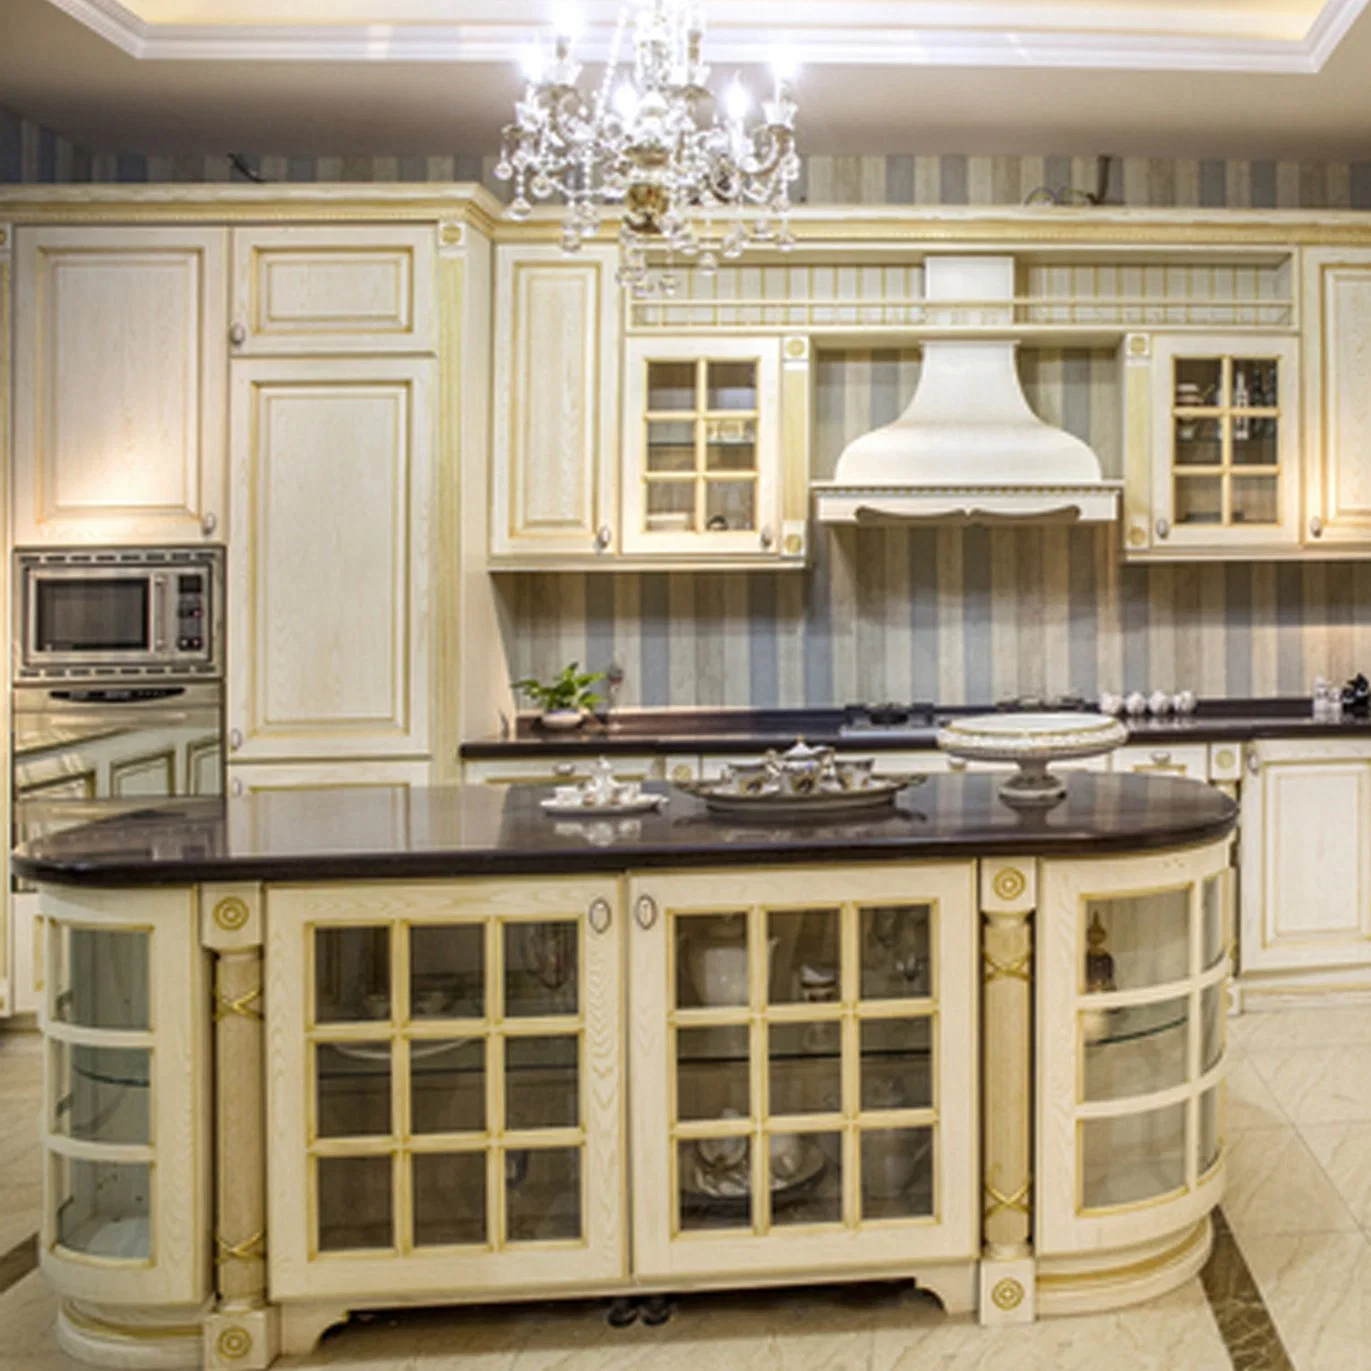 Made in China, Chinese Cabinet Factory, Customized Kitchen Furniture, Painted Cabinets, Solid Wood European Style Cabinets, and Raw Wood Cabinets